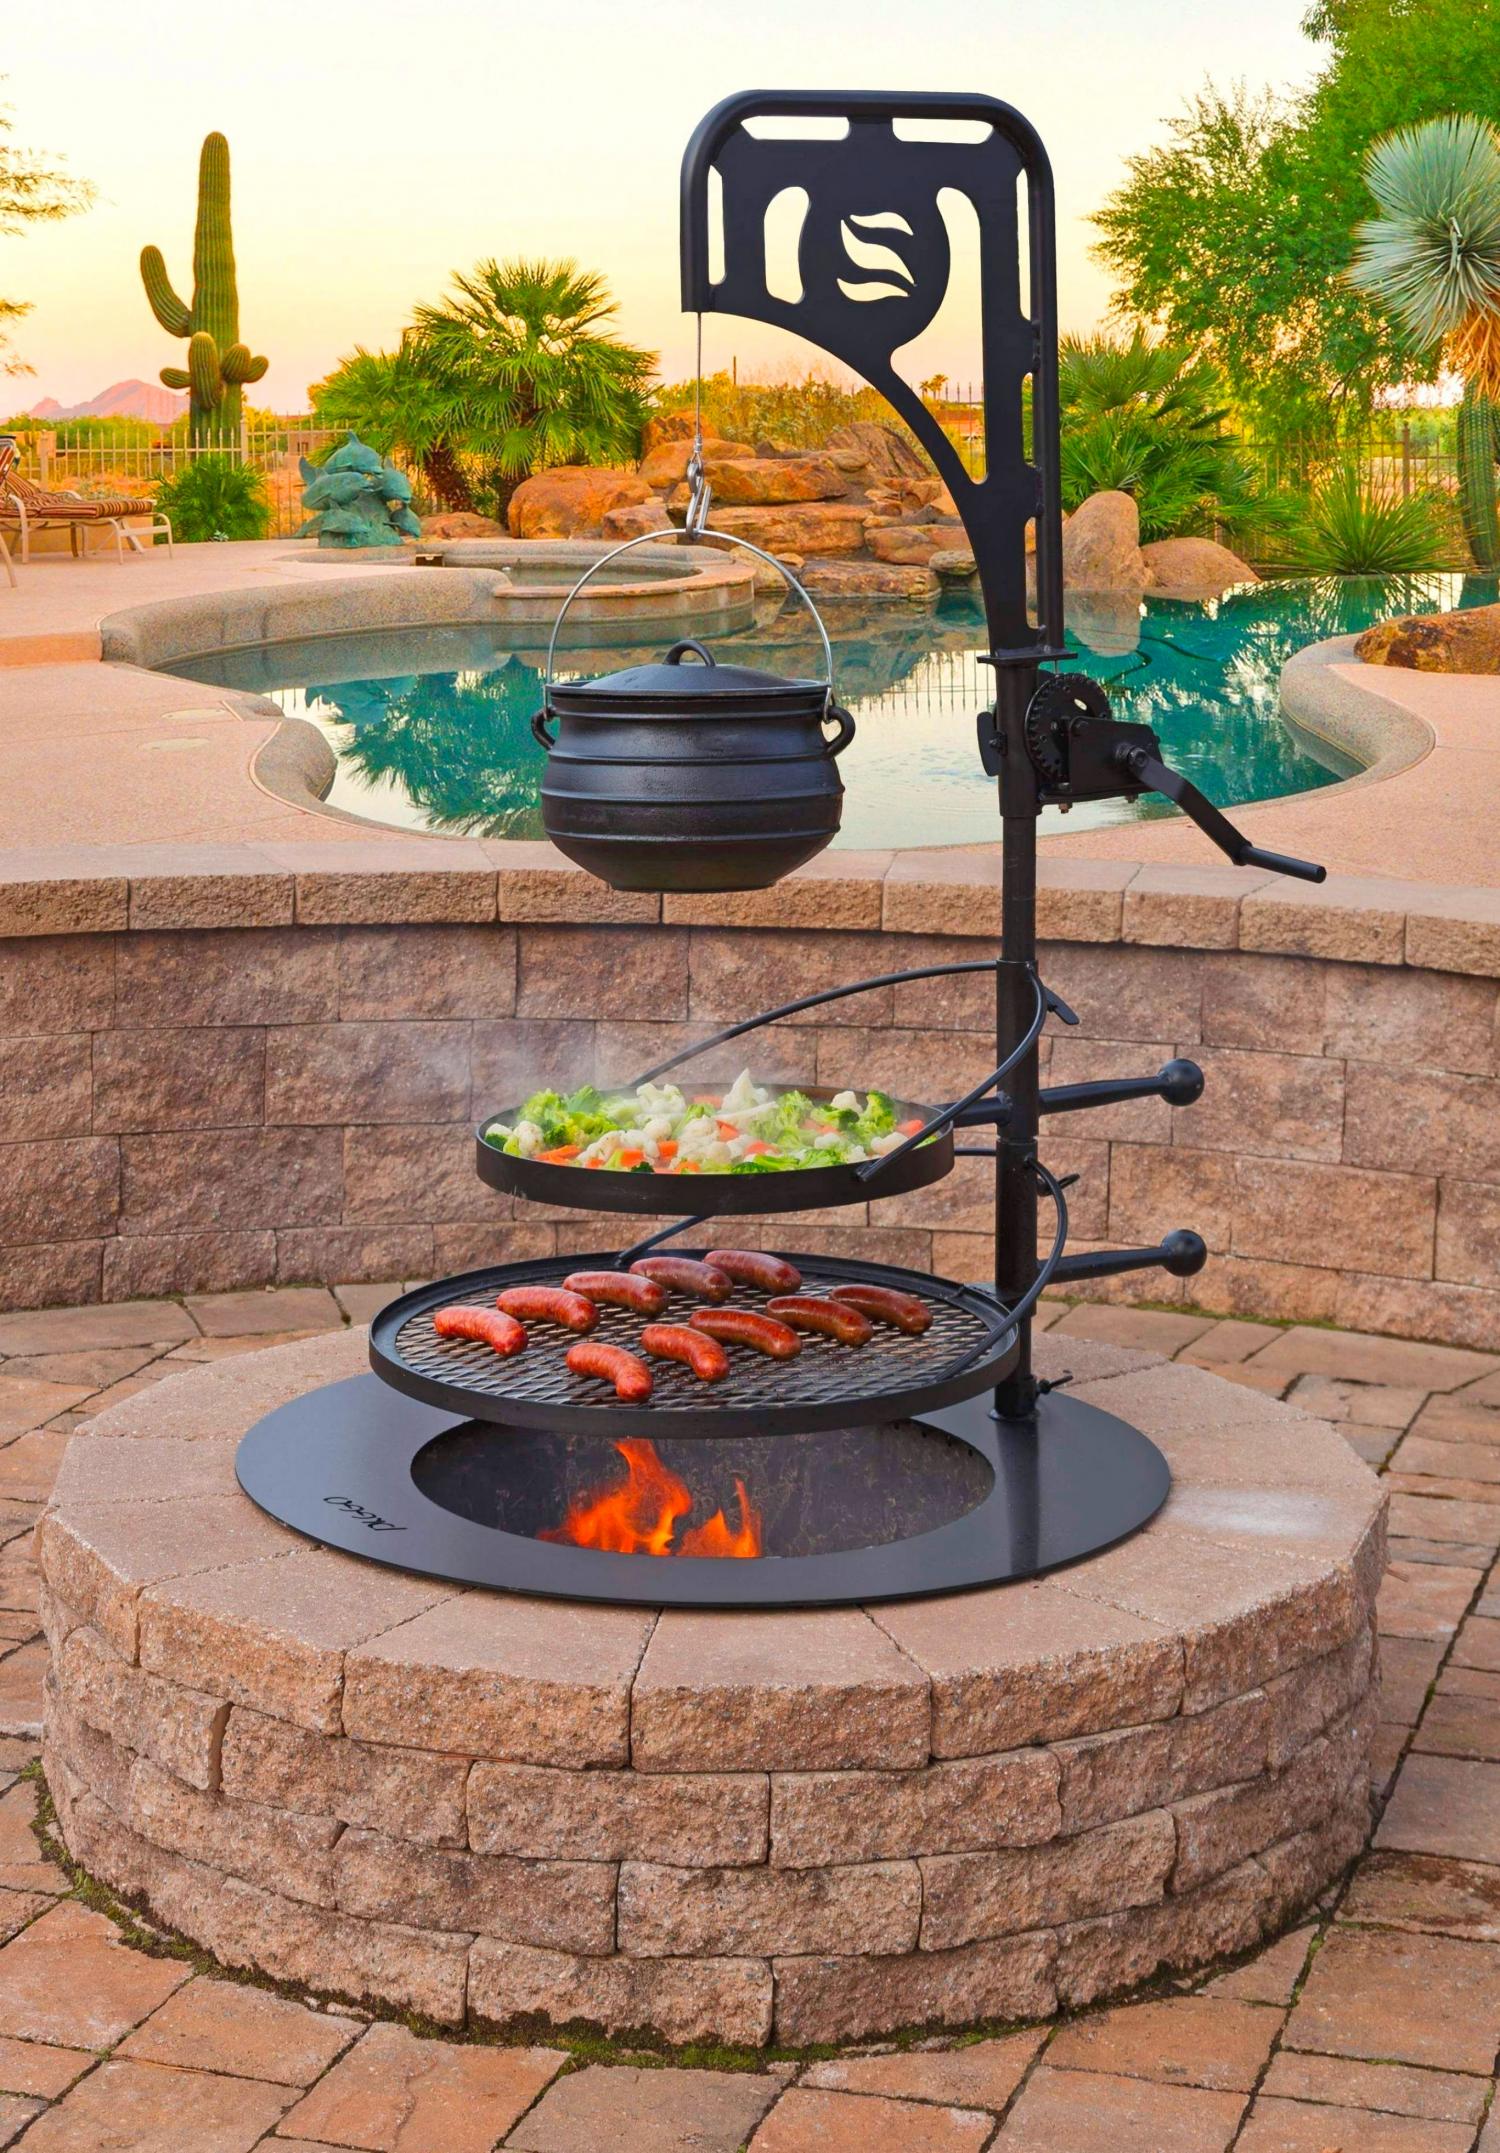  Ultimate Campfire Grill Turns Your Fire Pit Into a Tiered Cooking Machine - Breeo Fire pit cooker with winch